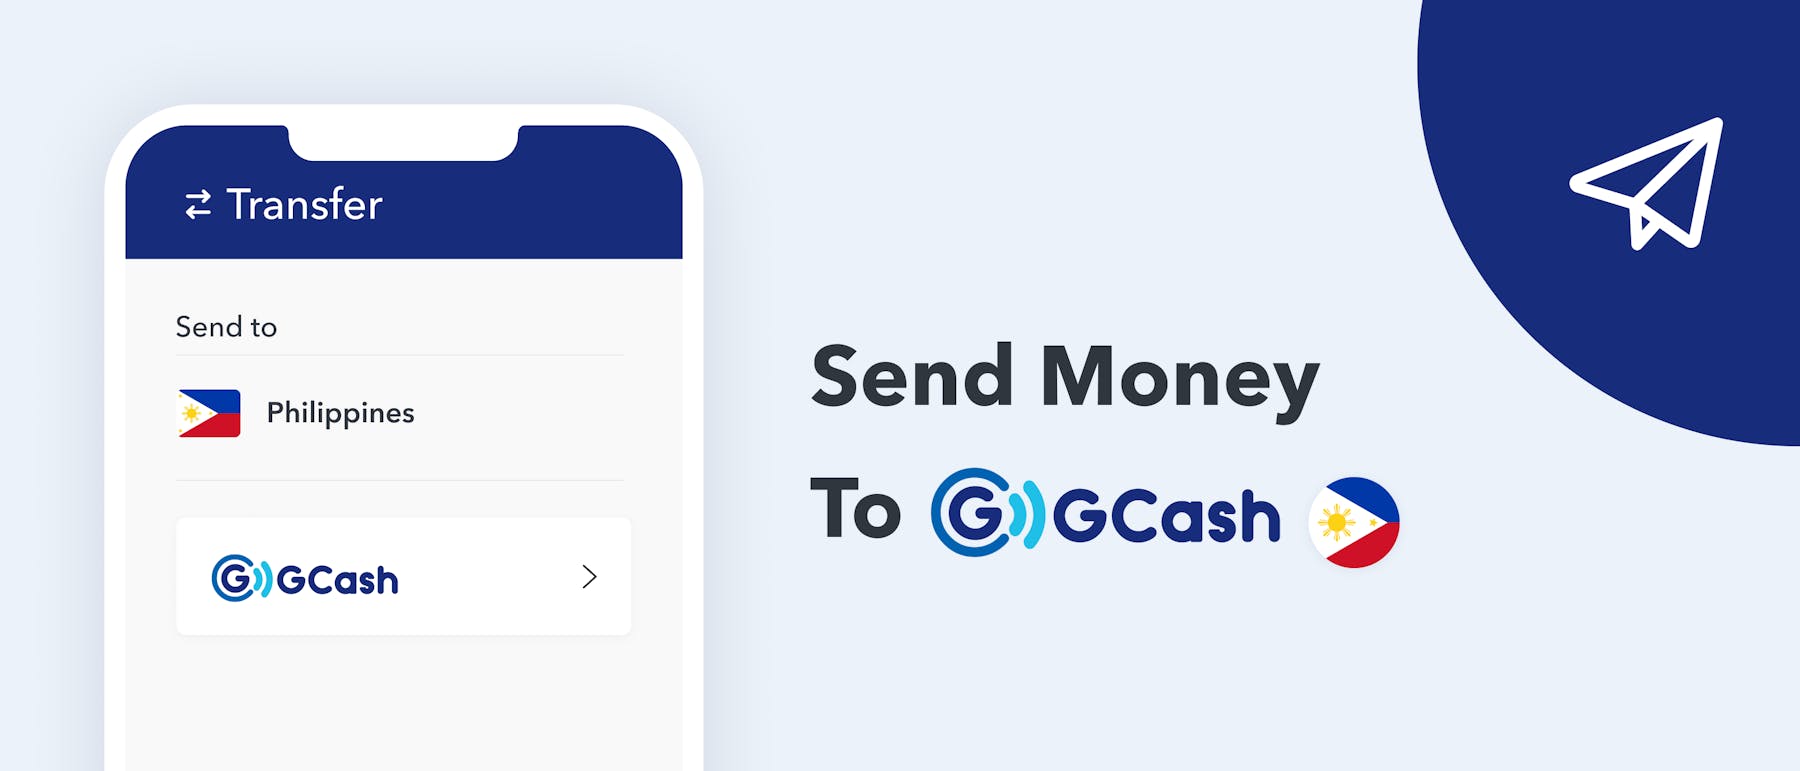 Send money to GCash in the Philippines